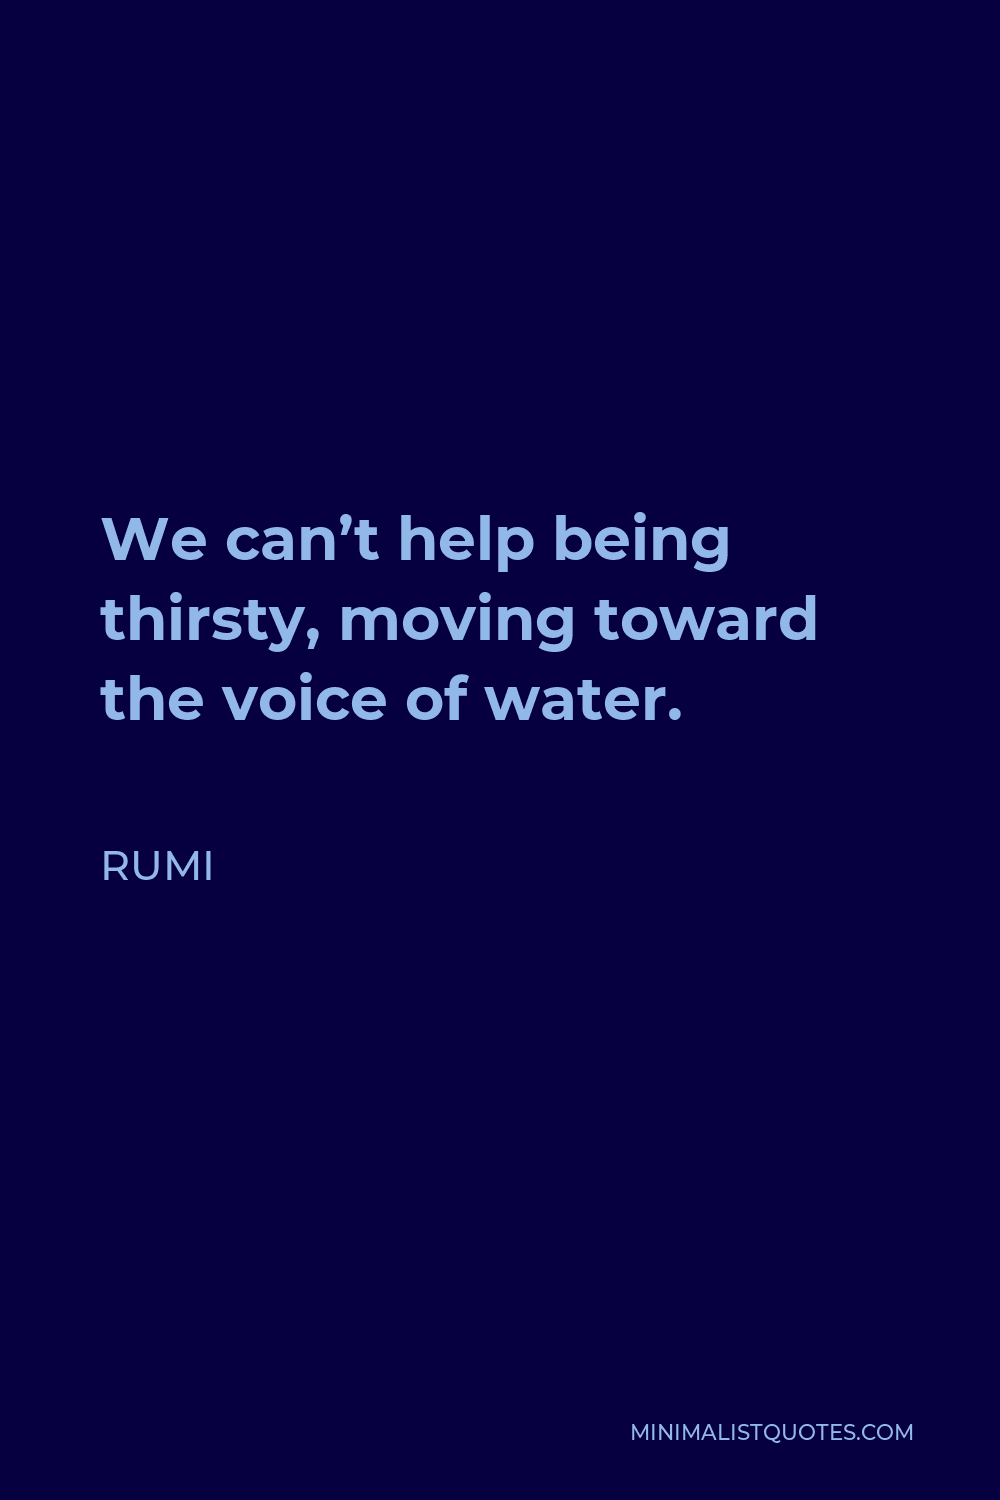 Rumi Quote - We can’t help being thirsty, moving toward the voice of water.